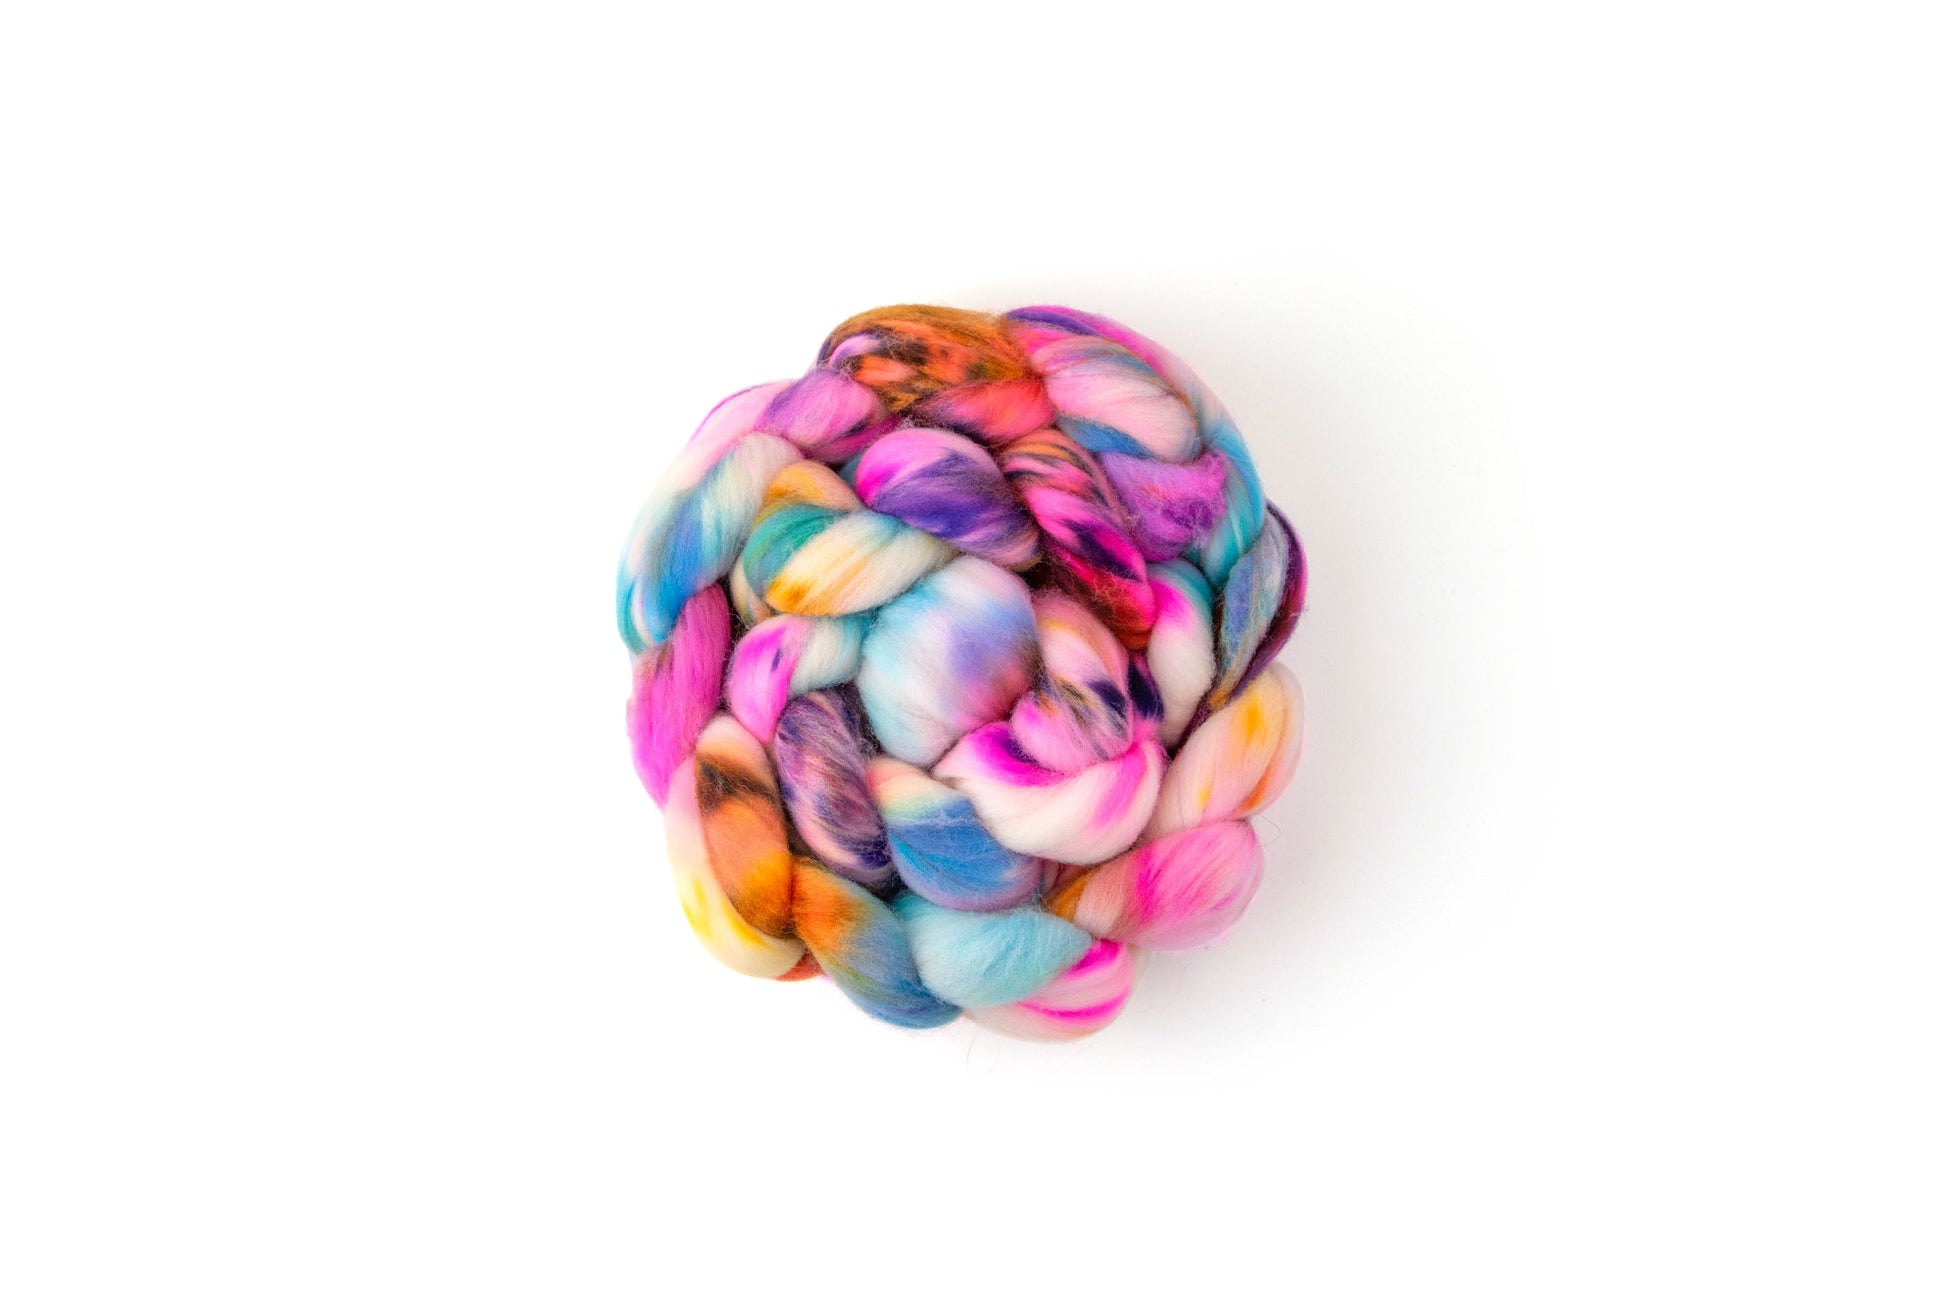 A braid of bright fiber wrapped into a circle of pink, orange, blue, and purple with a white base